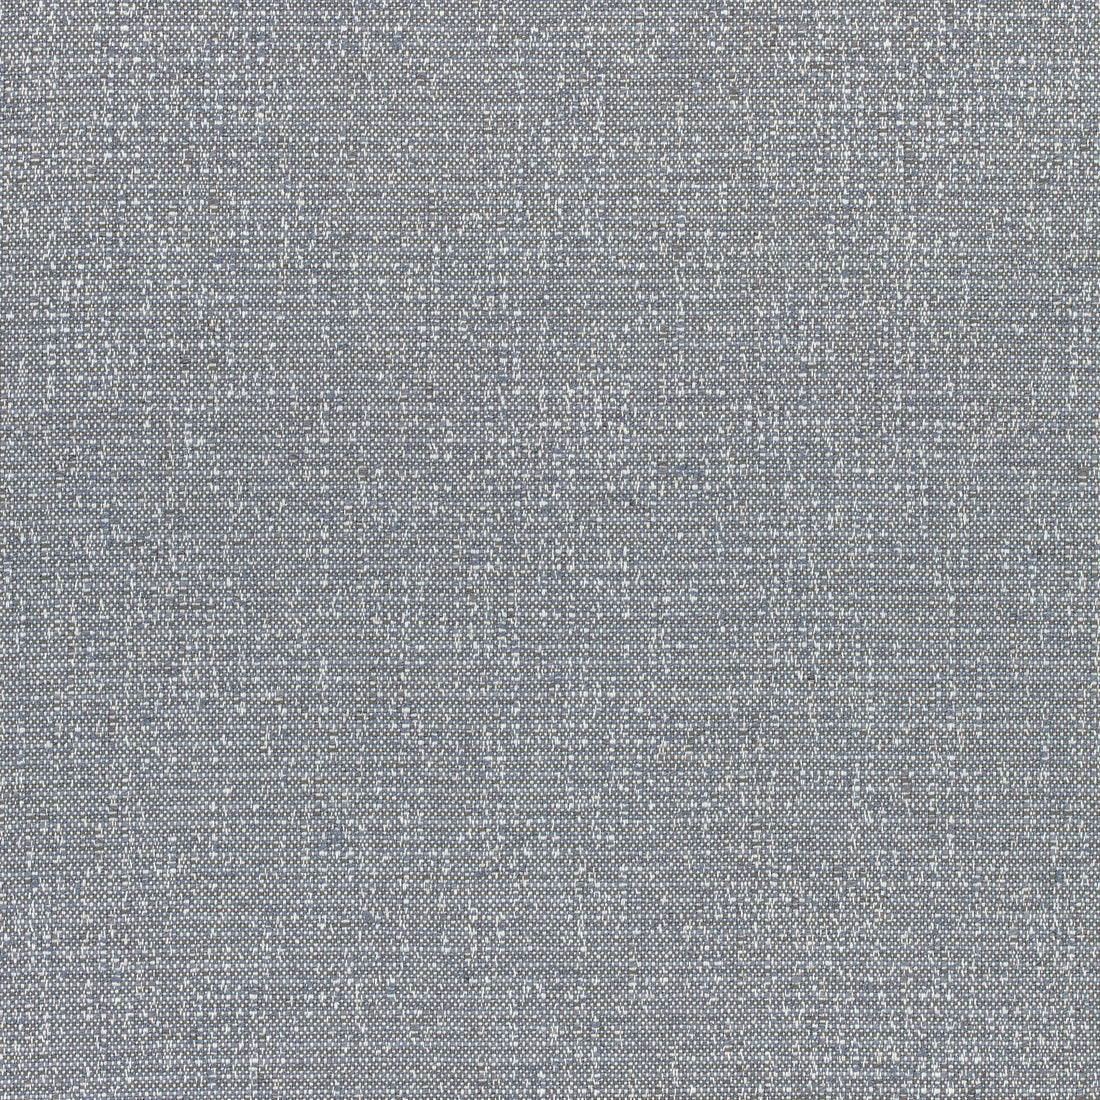 Everly fabric in smoke color - pattern number W74062 - by Thibaut in the Cadence collection